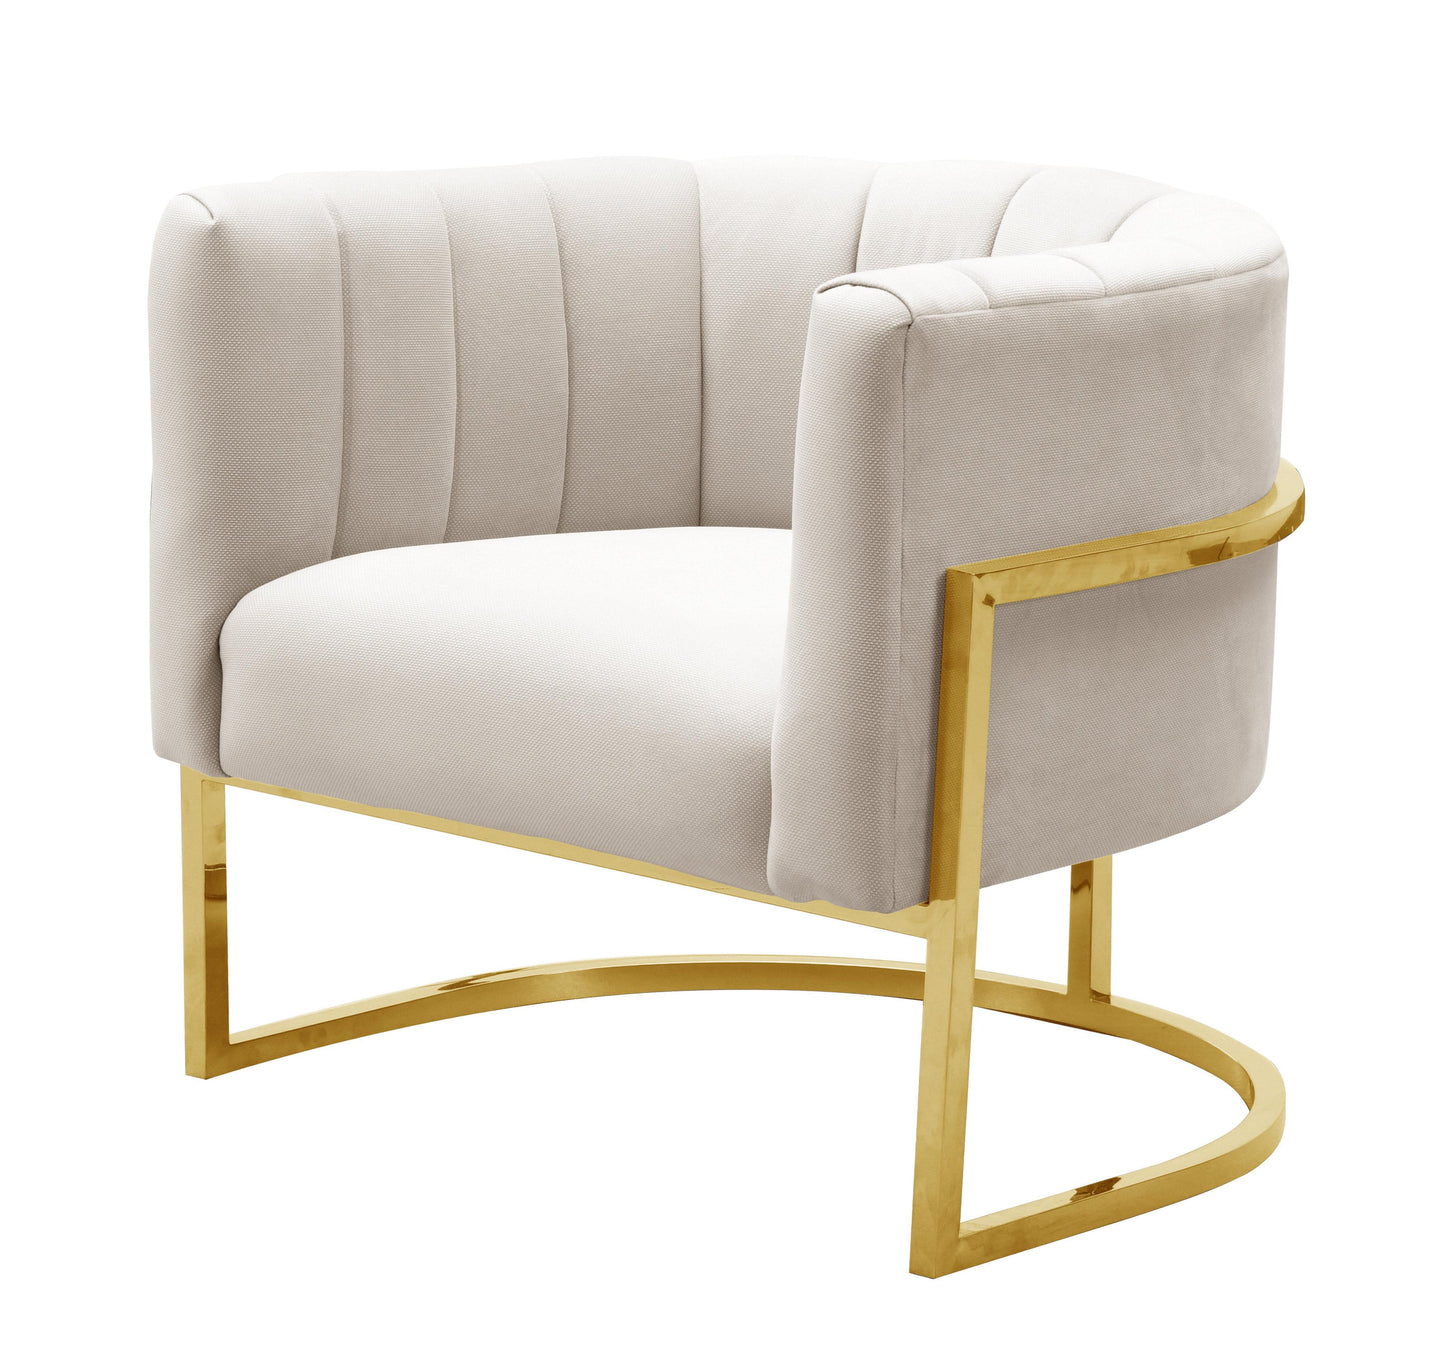 Tov Furniture Magnolia Spotted Cream Chair with Gold